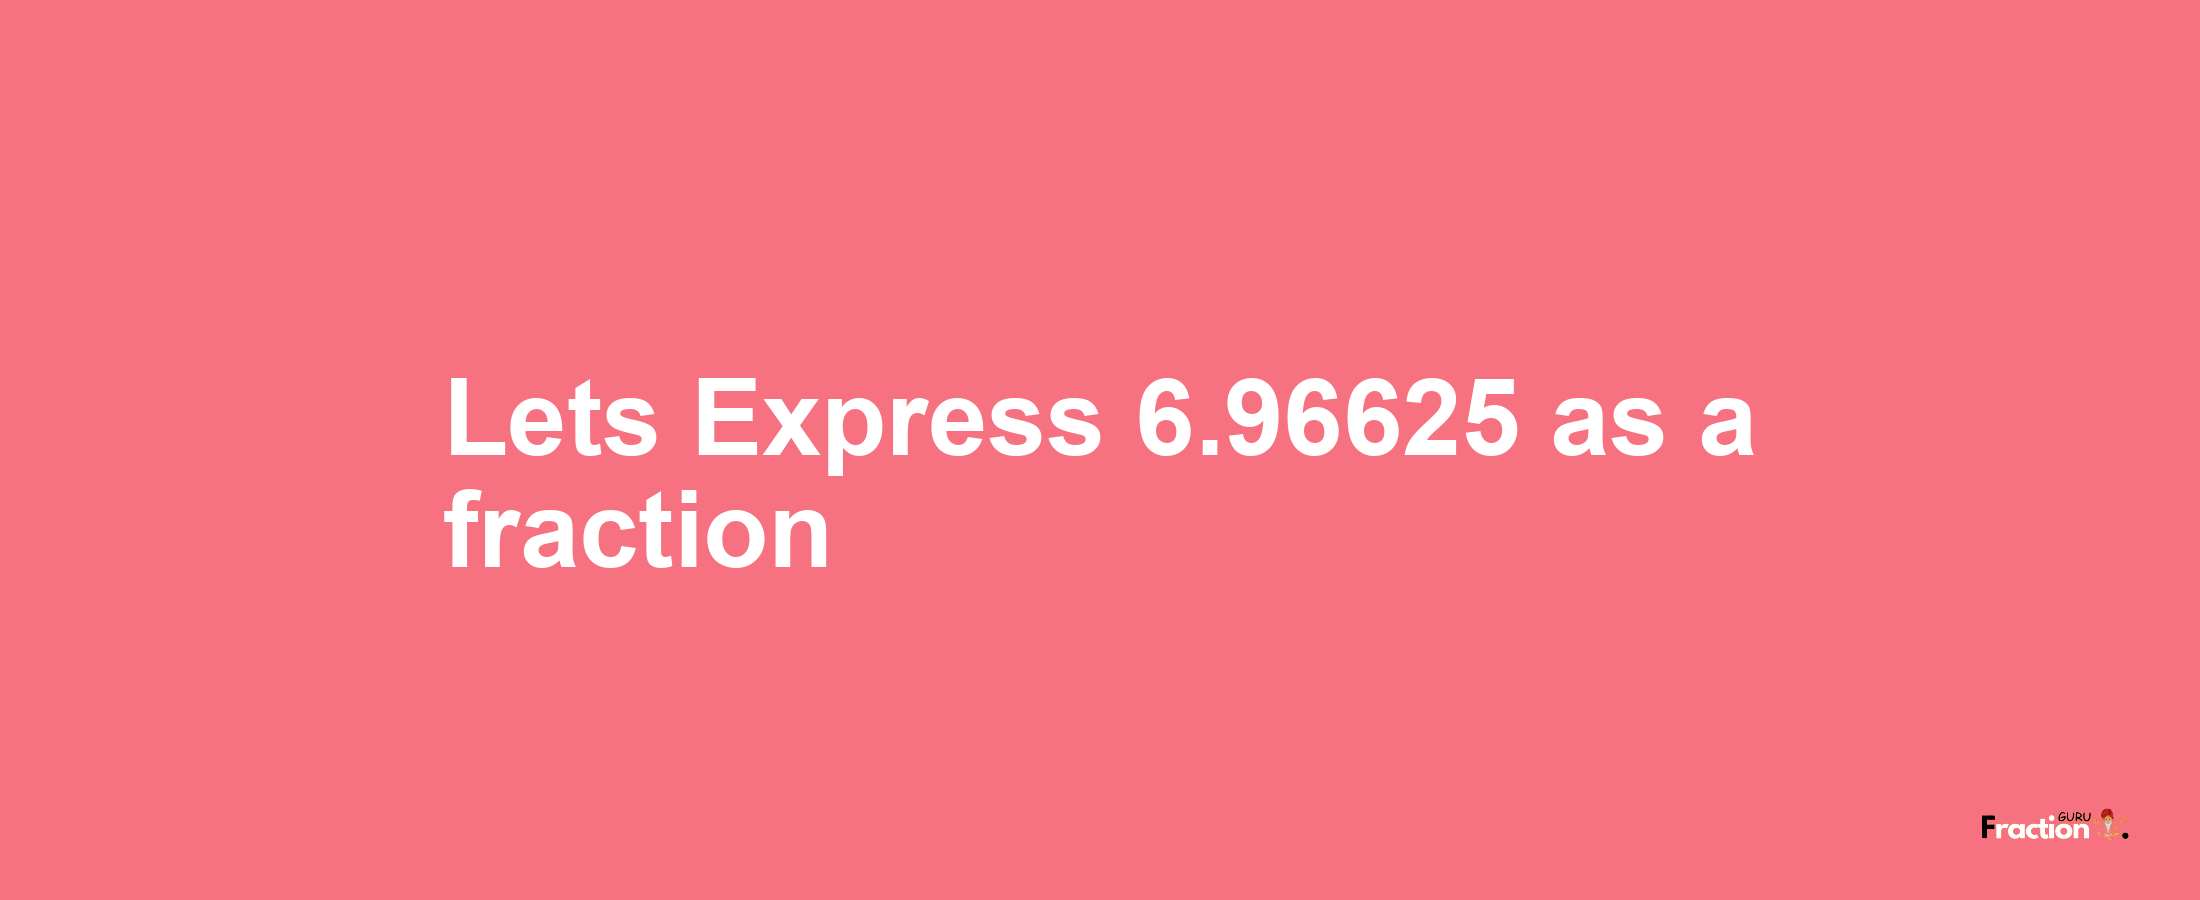 Lets Express 6.96625 as afraction